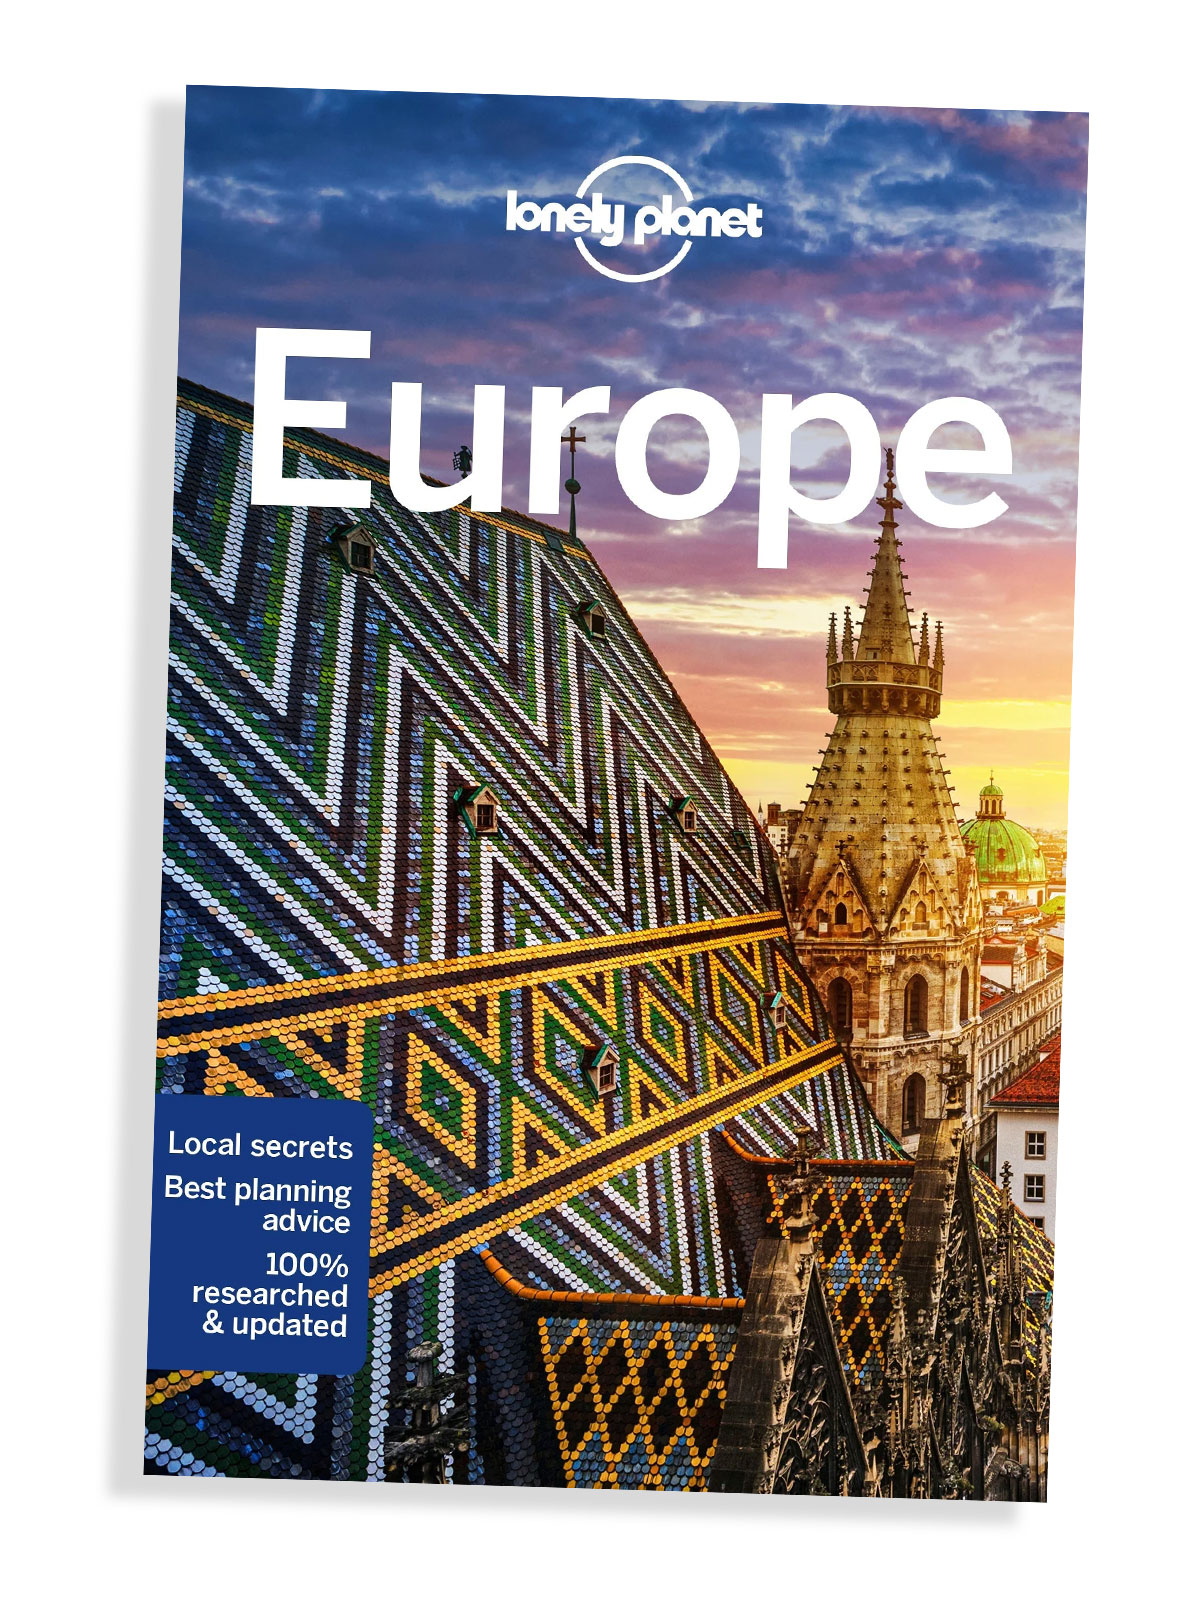 Europe Lonely Planet